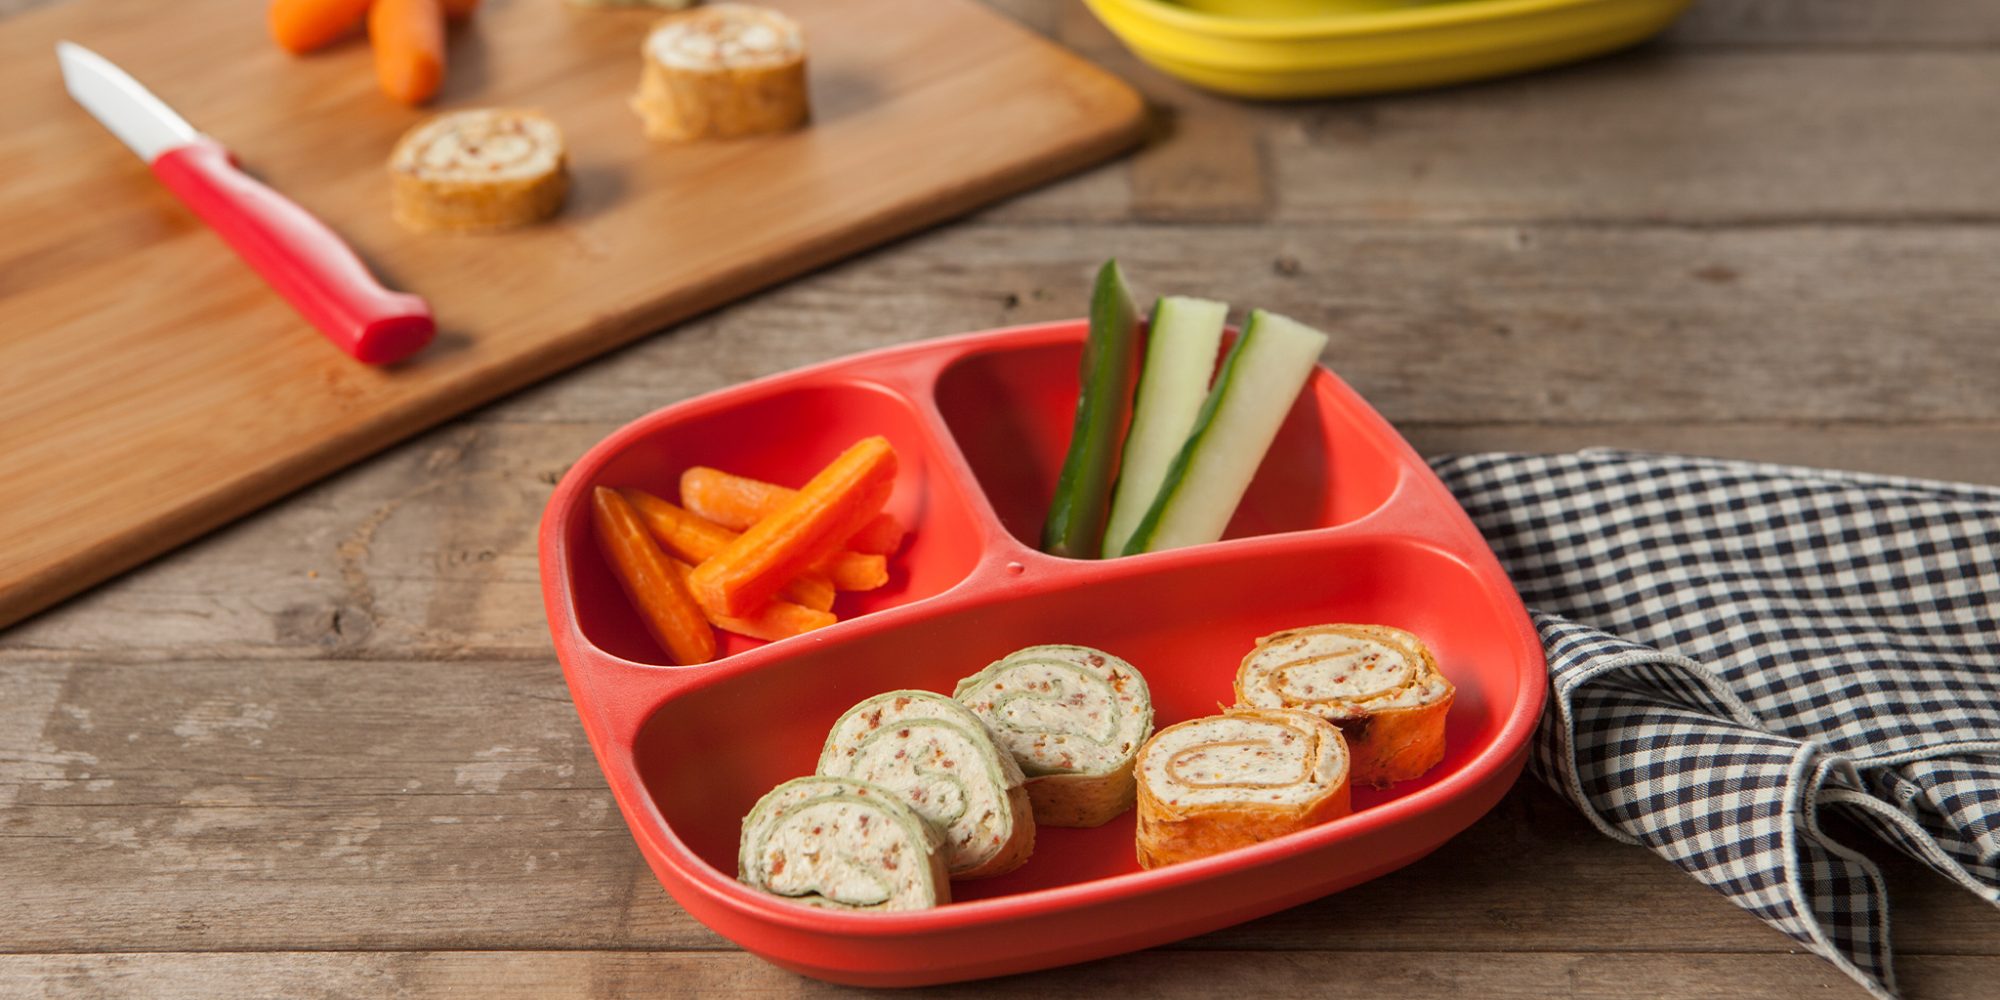 cream cheese pinwheels with fresh vegetables for an after school snack